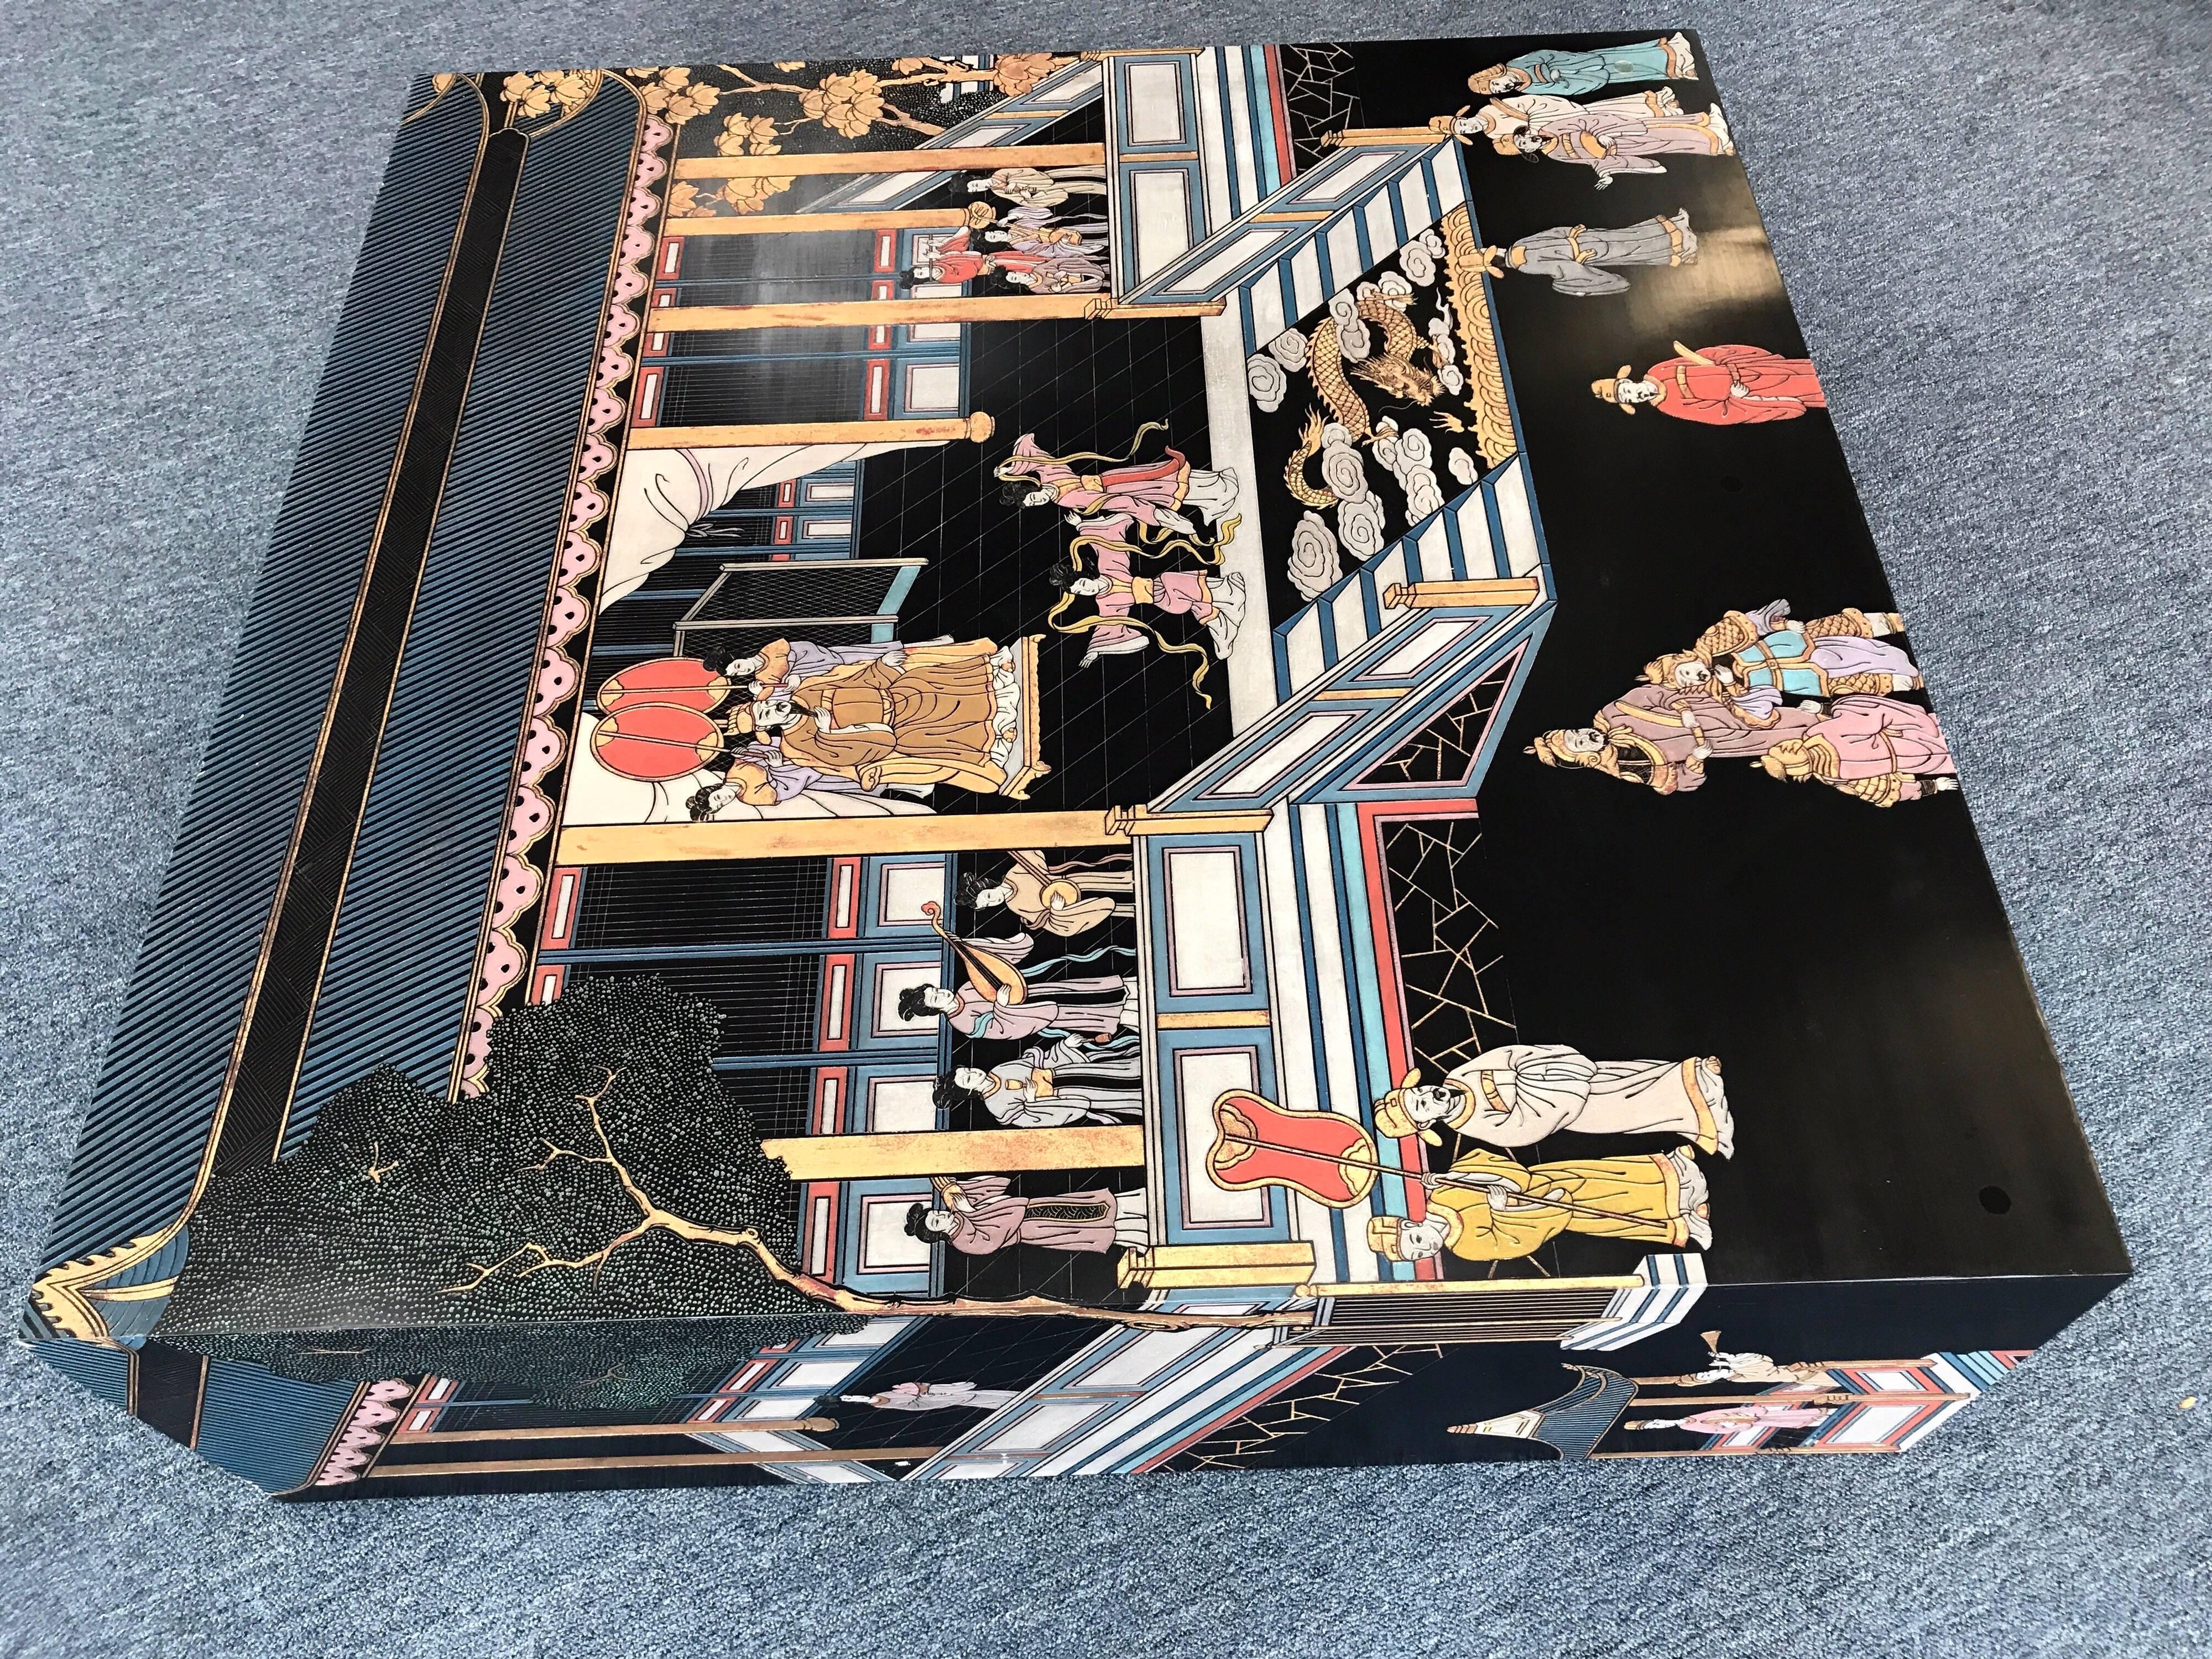 Exquisite black lacquer Maitland Smith oversized 50 x 50 inch table is carved and hand-painted and topped with glass for protection. It's decorative visual elements of a Chinese village scene reach down both sides in vibrant colors. Comes with a